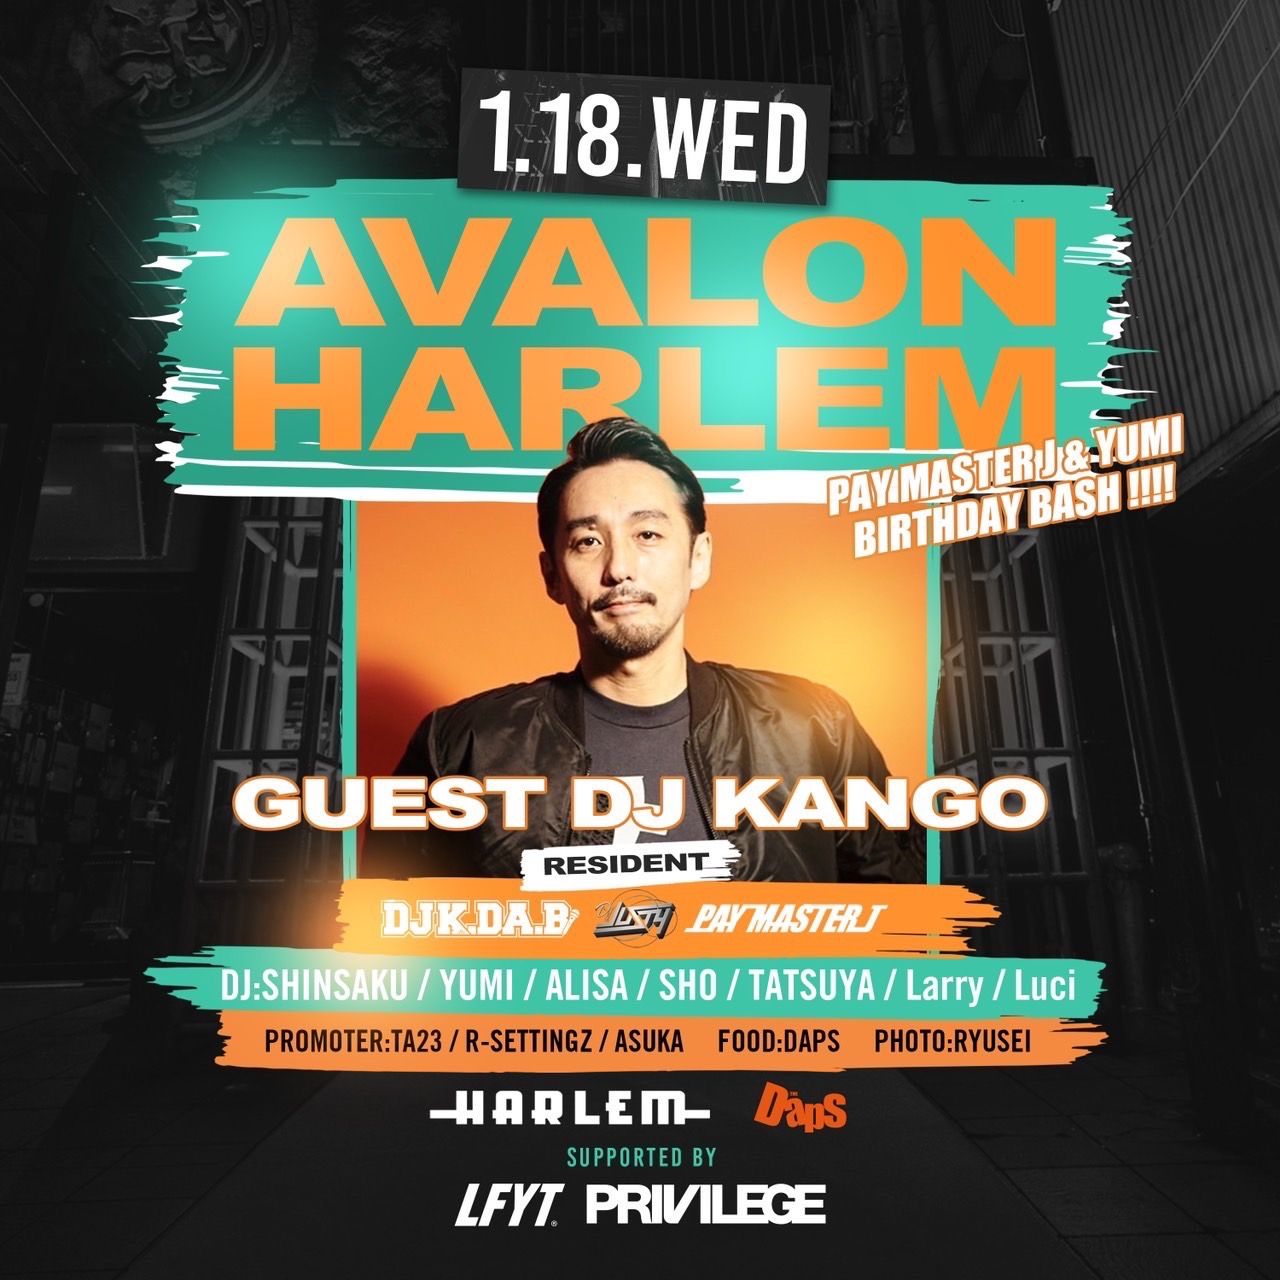 AVALON supported by LFYT, PRIVILEGE